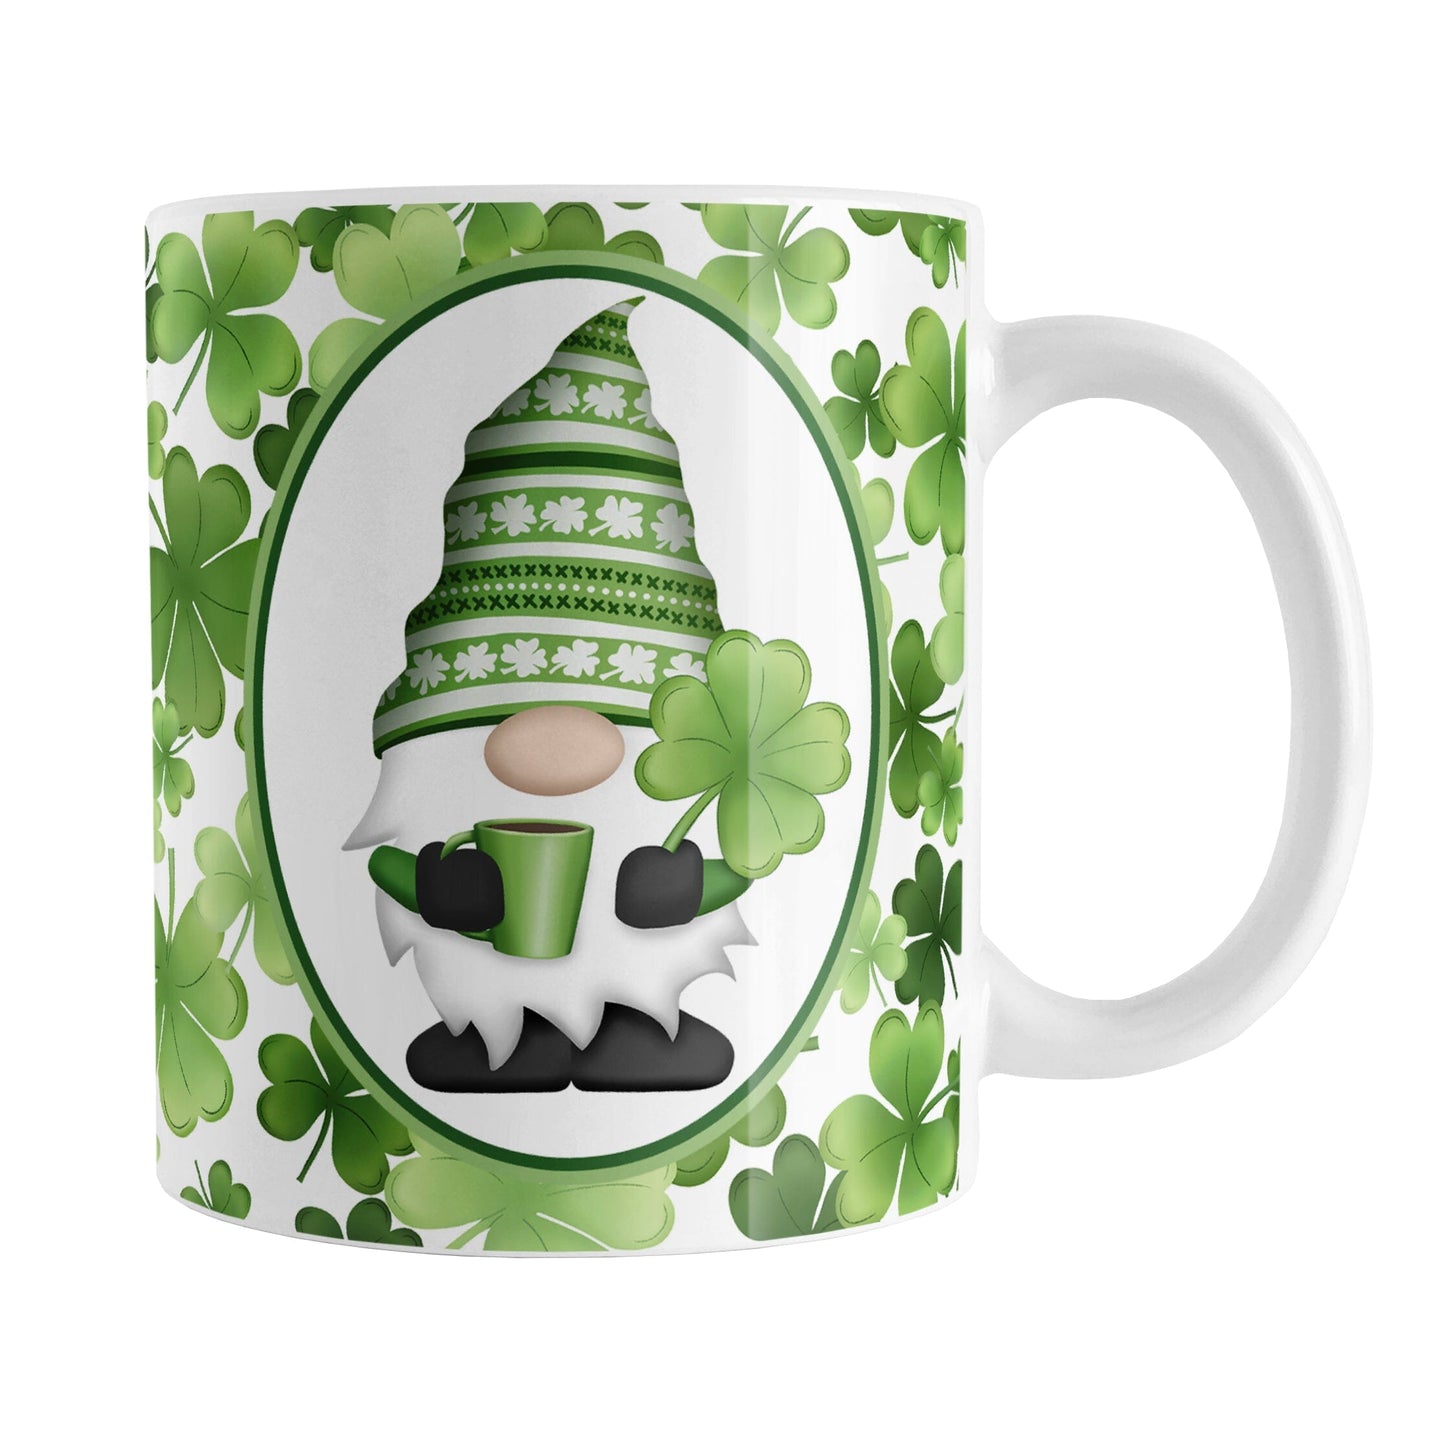 Green Gnome Shamrocks Mug (11oz) at Amy's Coffee Mugs. A ceramic coffee mug designed with an adorable green hat gnome holding a 4-leaf clover and a hot beverage in a white oval over a pattern of green shamrocks in different shades of green that wrap around the mug to the handle.